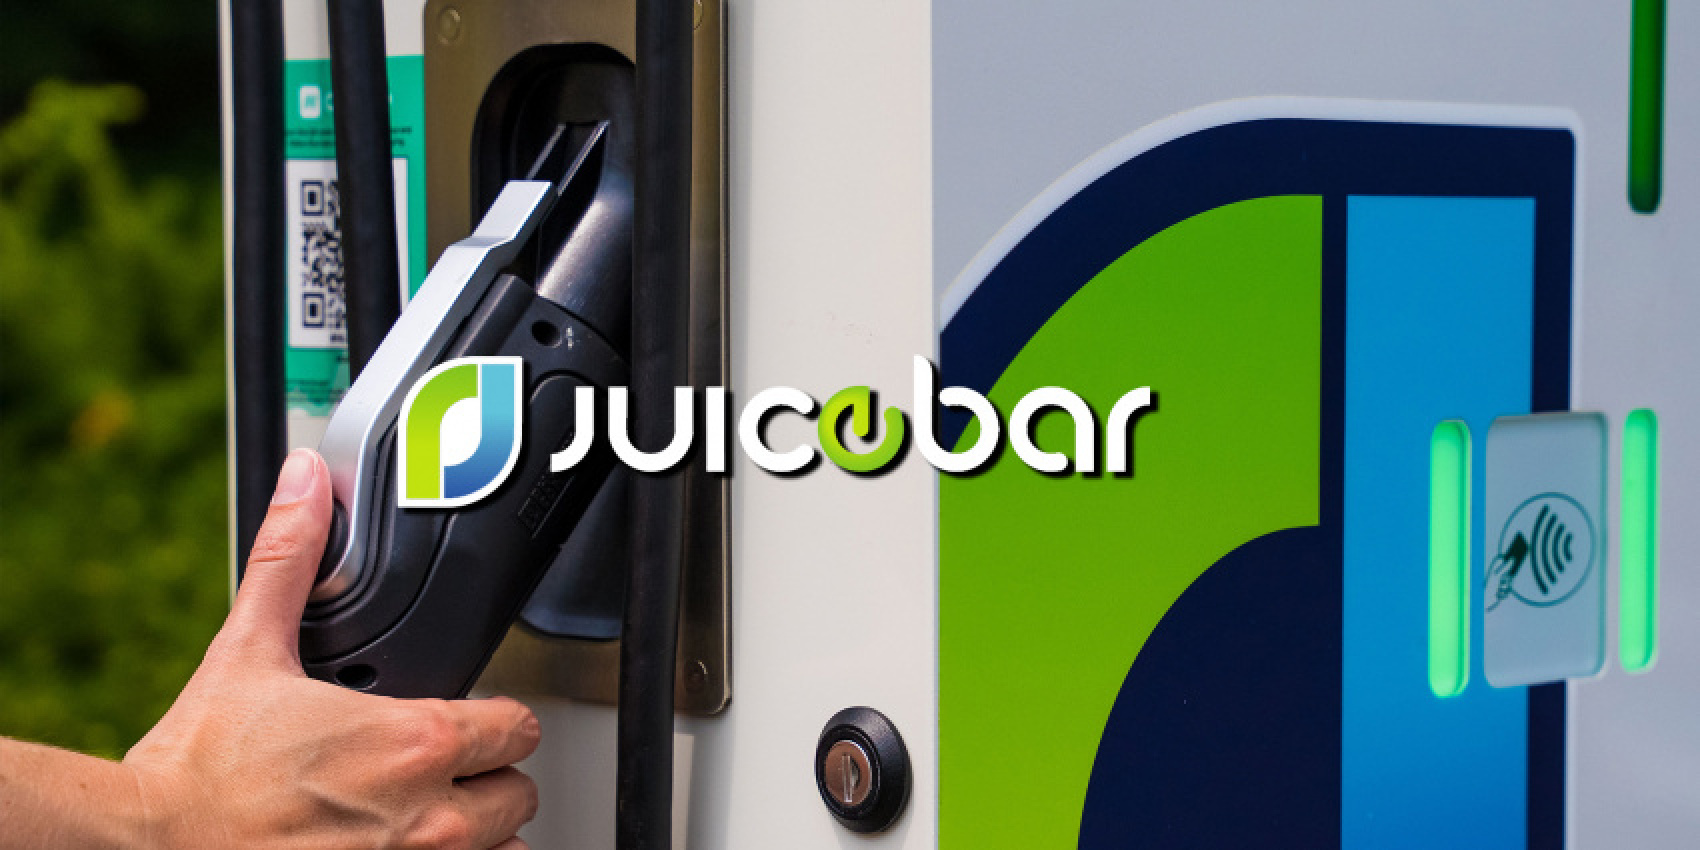 autos, cars, ram, as 3g service begins to shutdown, juicebar is offering a ‘trade up program’ to replace other companies’ dated ev chargers with 4g models